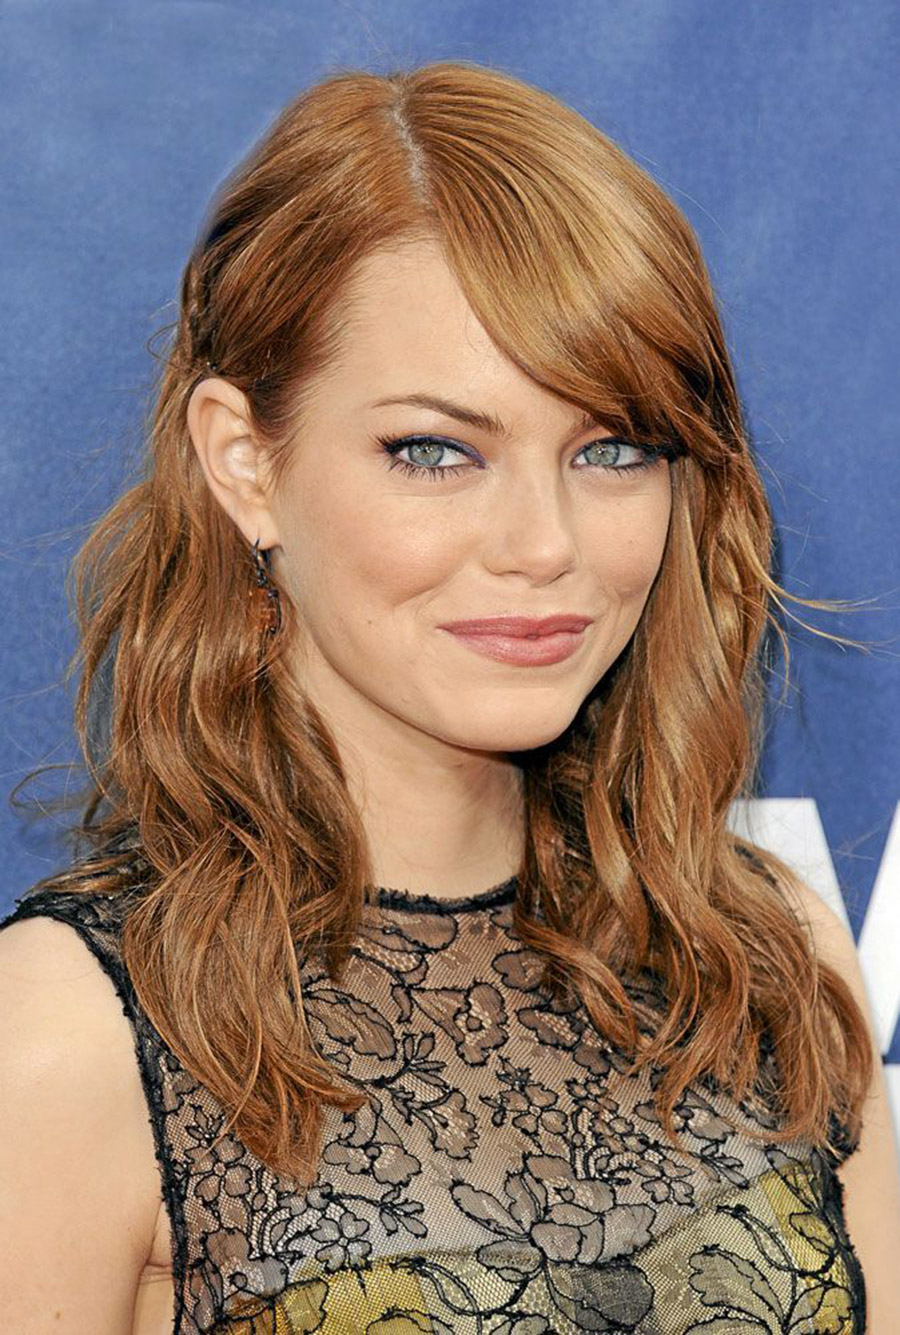 Emma-stone-the-best-famous-picture-actress-Maquillage-de-star